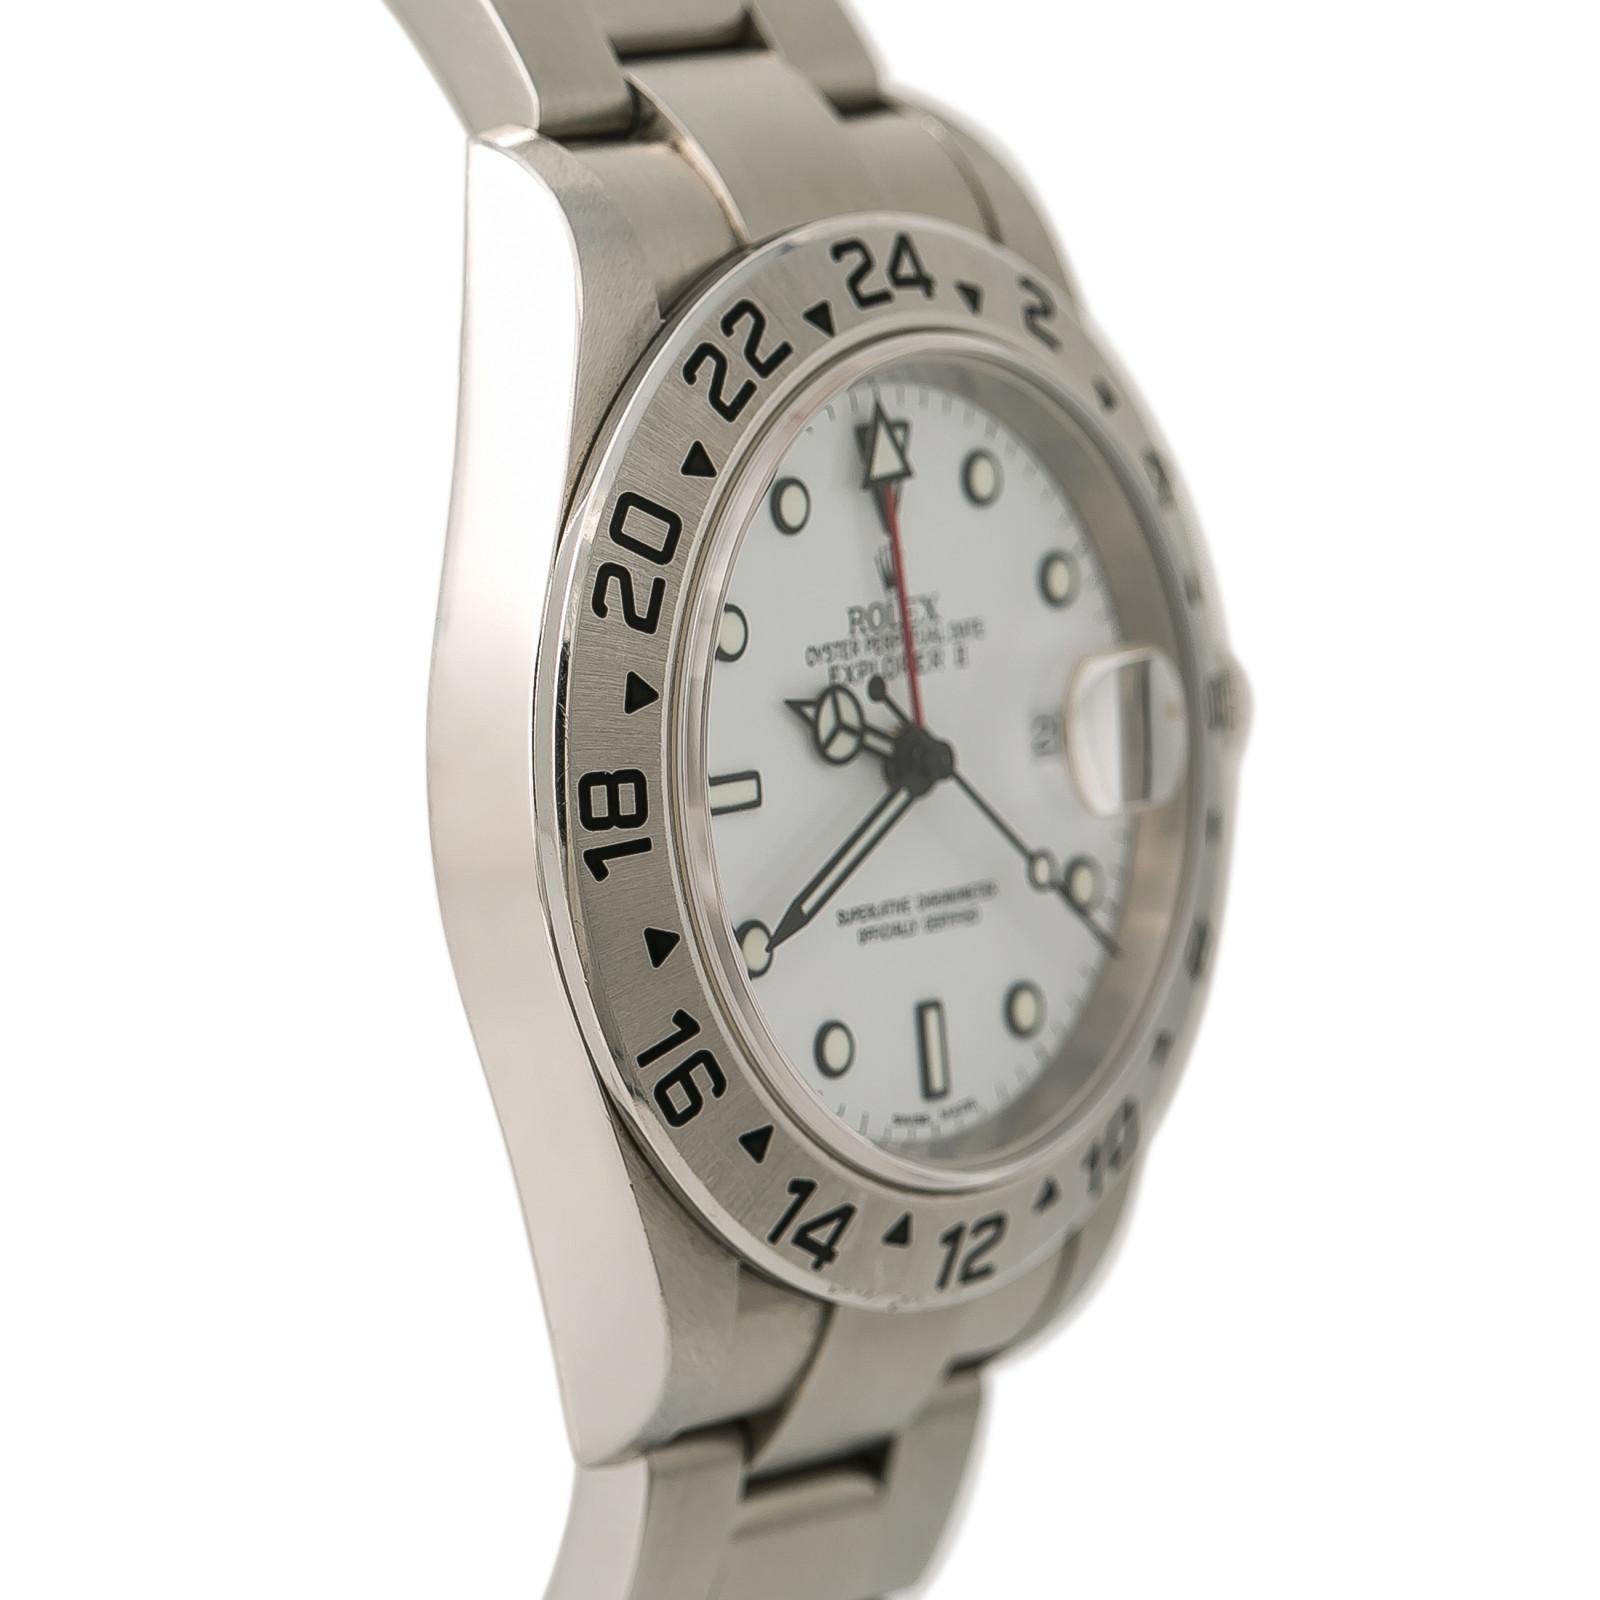 Rolex Explorer II6840, Dial Certified Authentic In Excellent Condition For Sale In Miami, FL